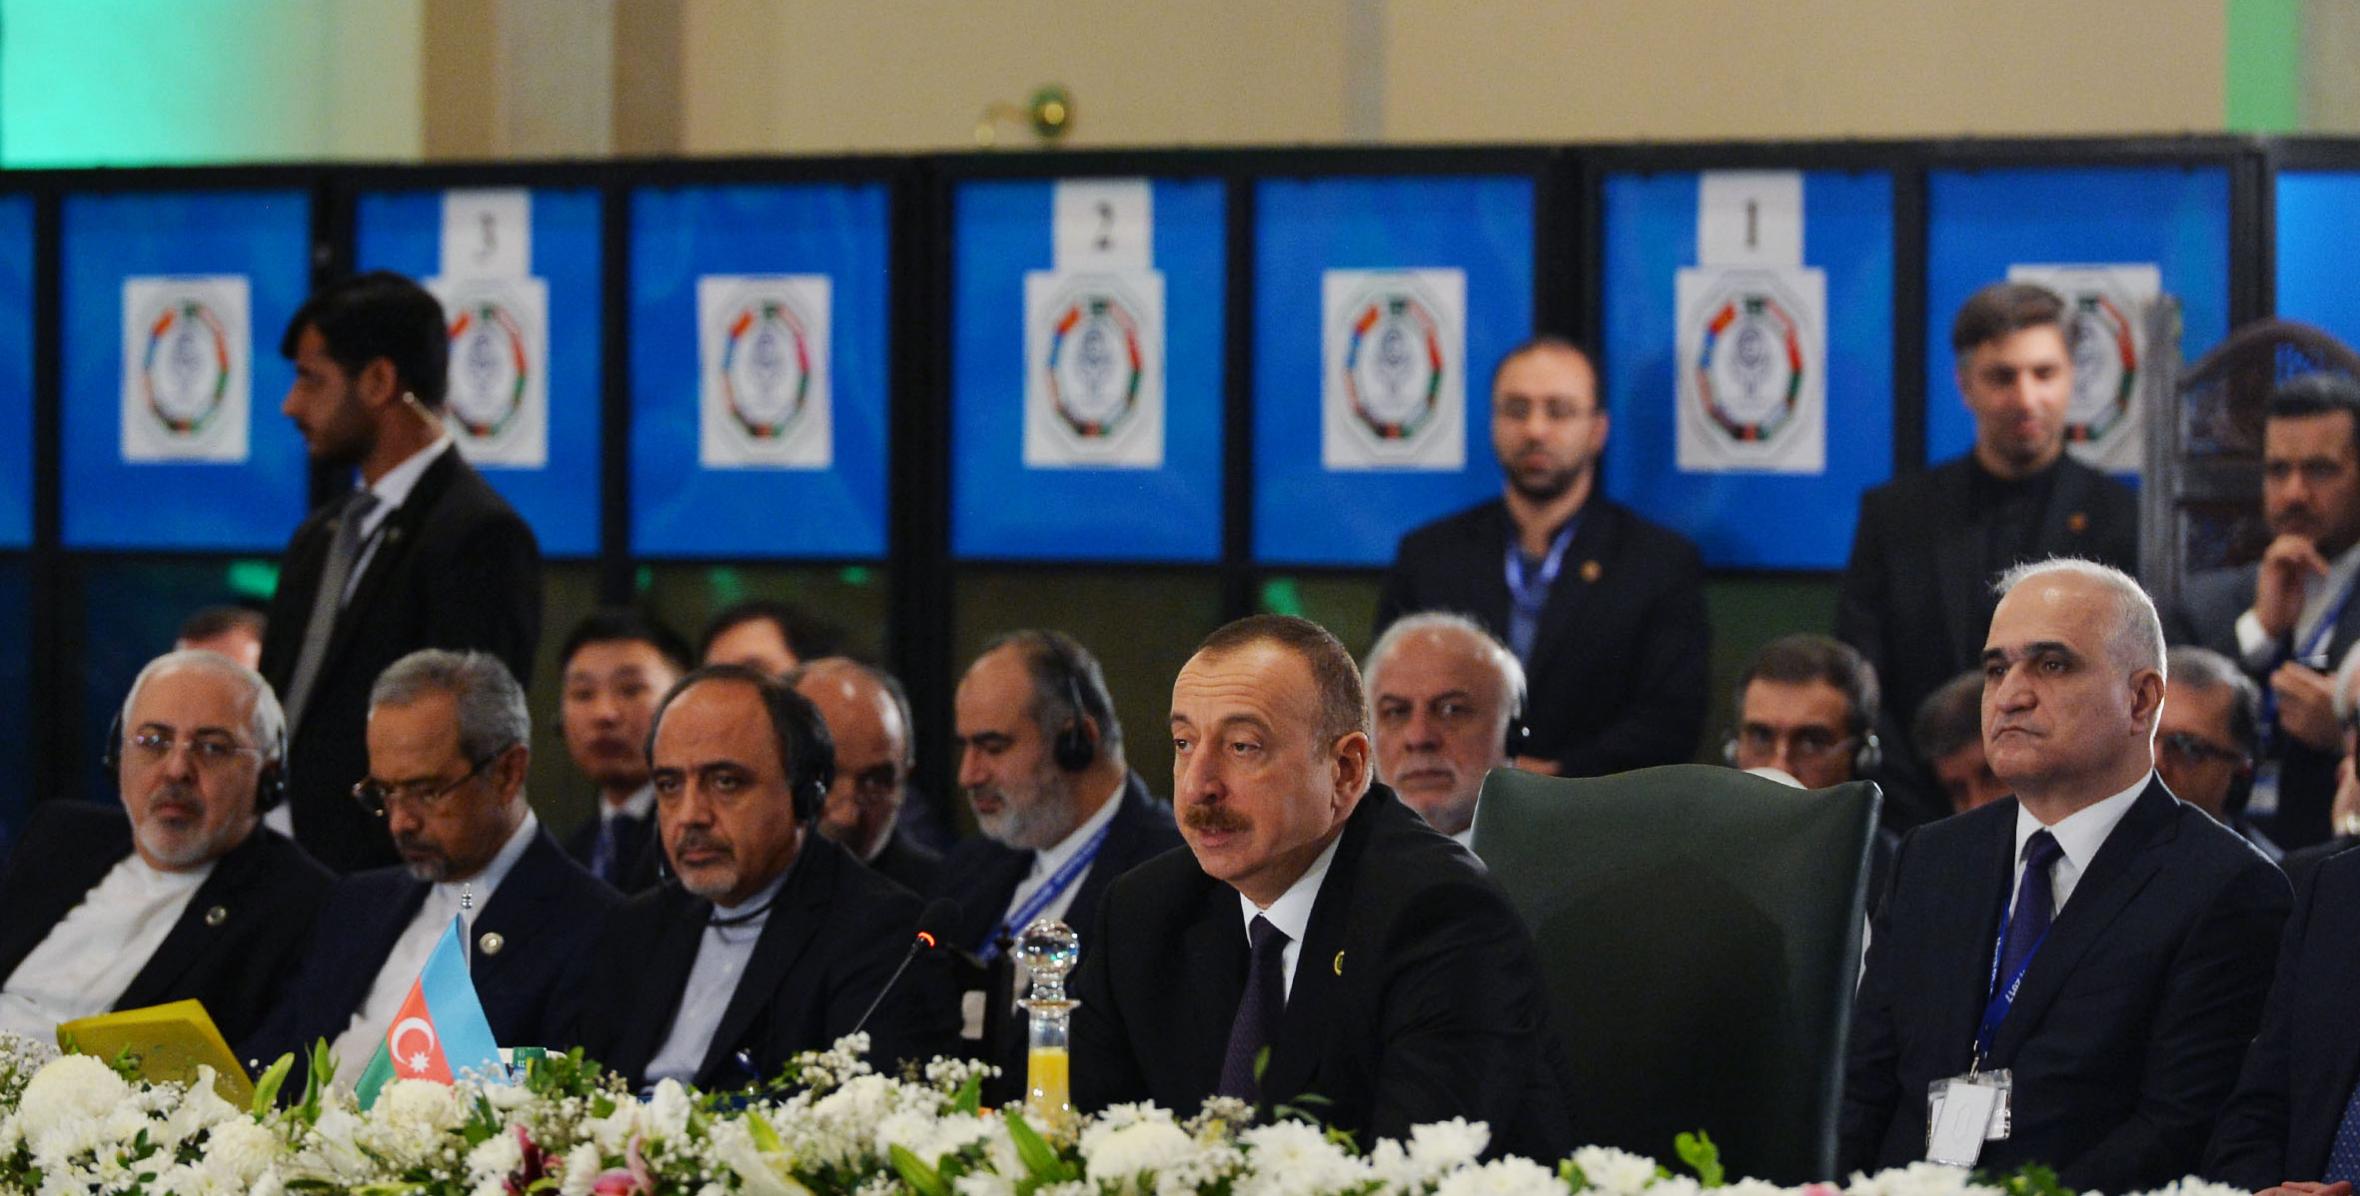 Speech by Ilham Aliyev at the 13th Summit of Economic Cooperation Organization in Islamabad